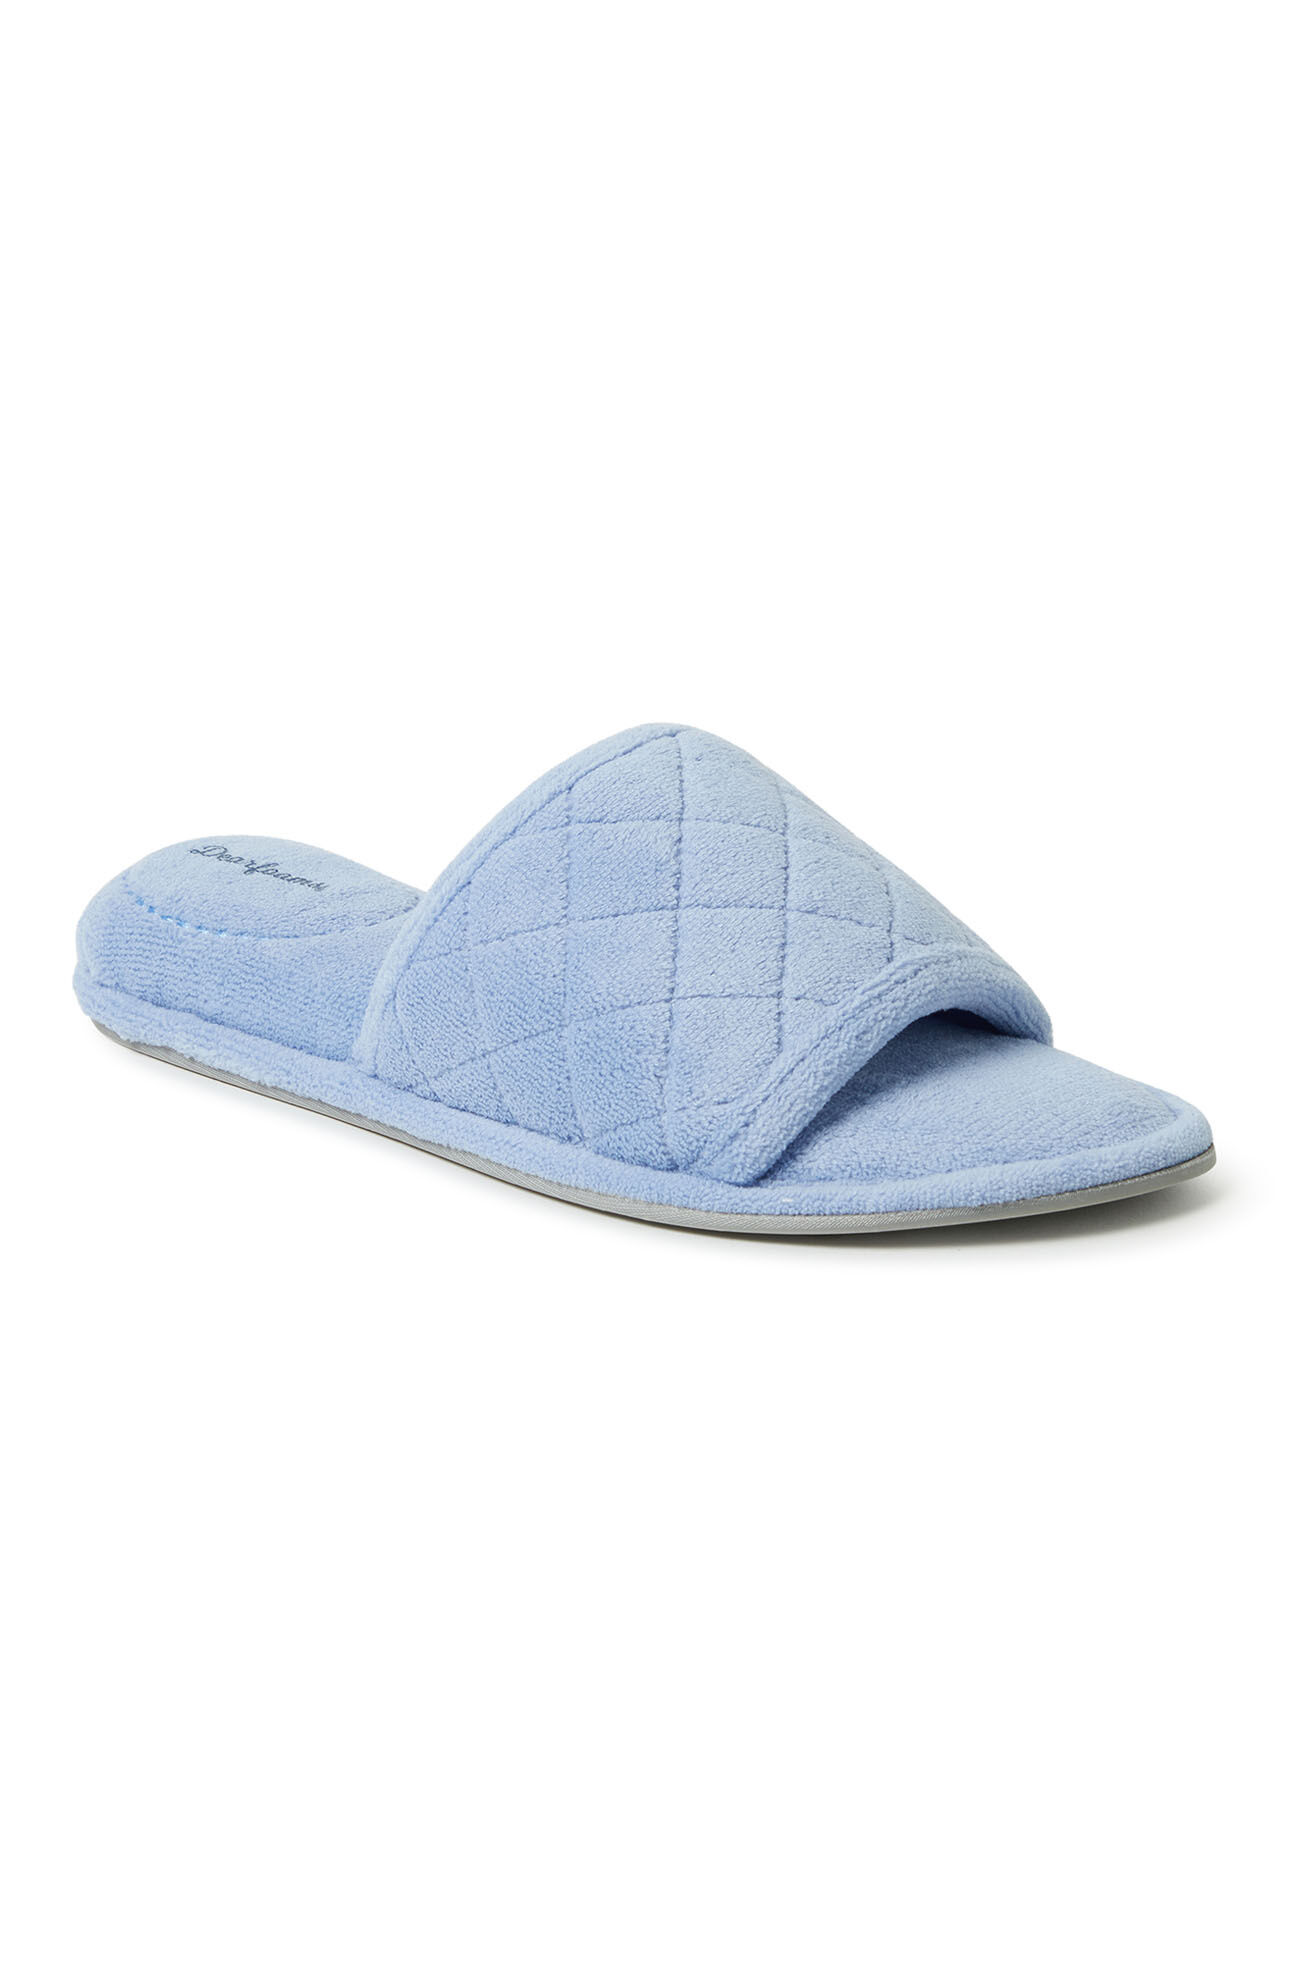 Women's Beatrice Quilted Terry Slide Slipper by Dearfoams in Iceberg (Size LARGE)